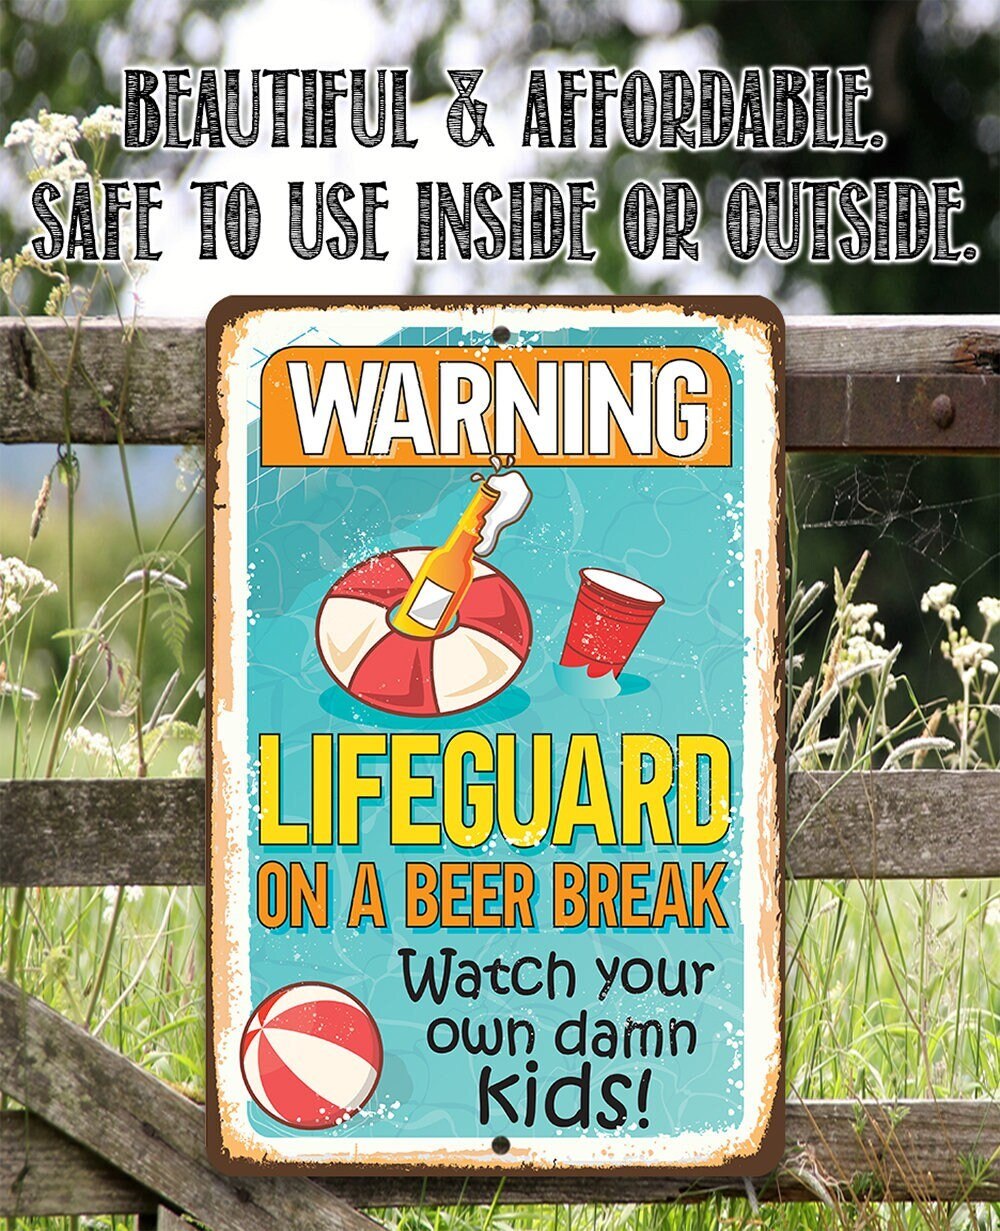 Warning Lifeguard On A Beer Break, Watch Your Own Kids - Metal Sign Metal Sign Lone Star Art 